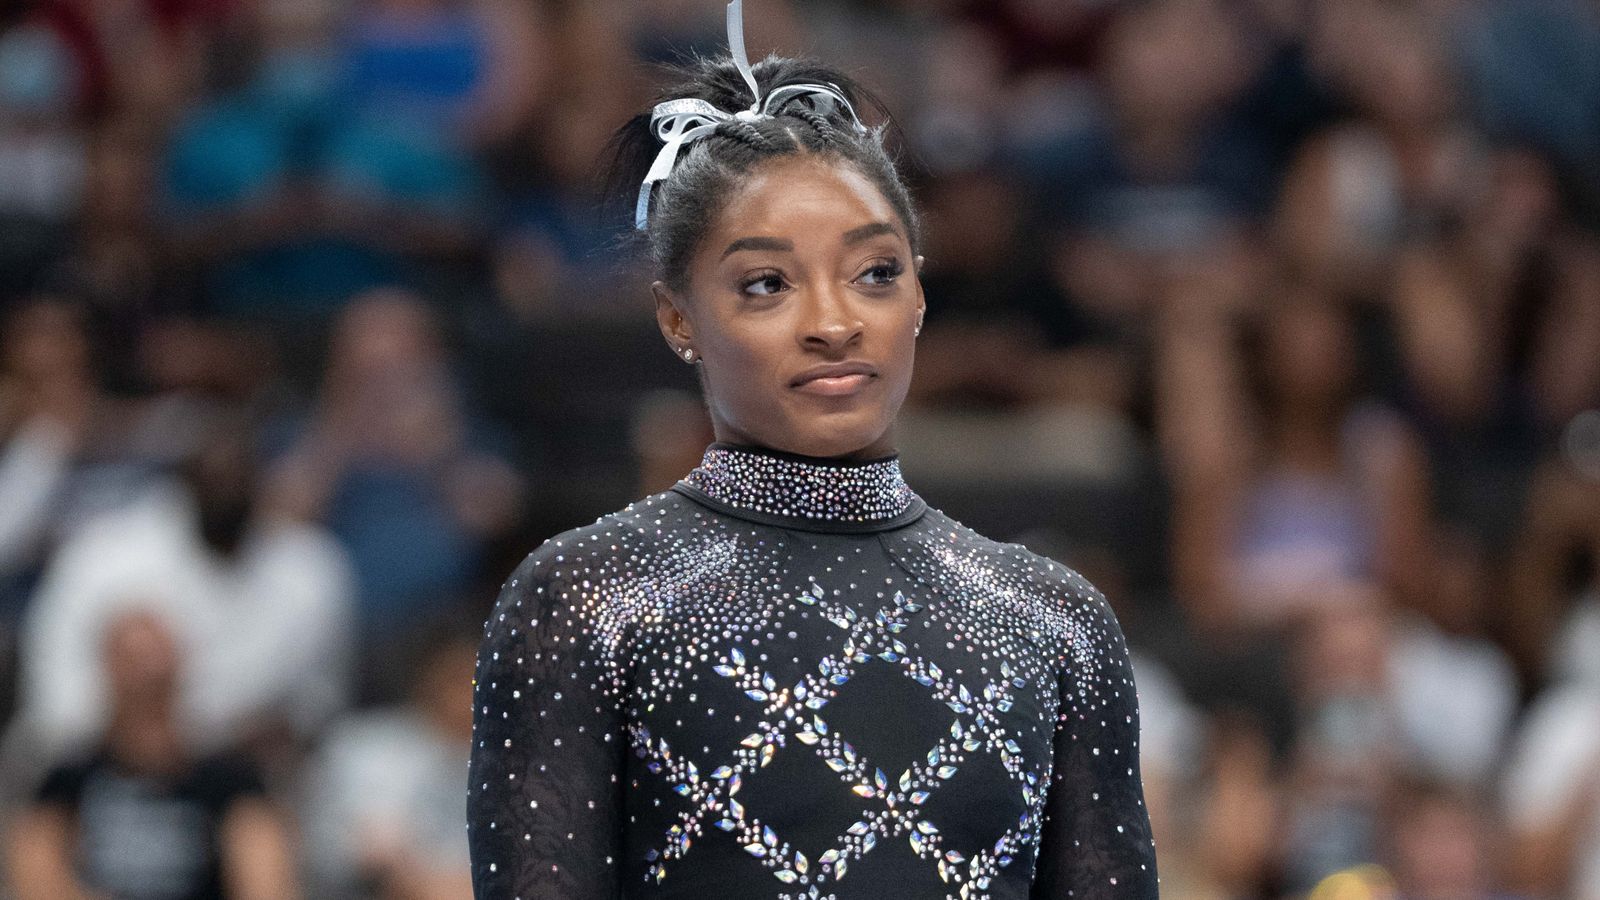 Gymnastics Ireland 'deeply sorry' after Simone Biles criticises young black gymnast being denied medal